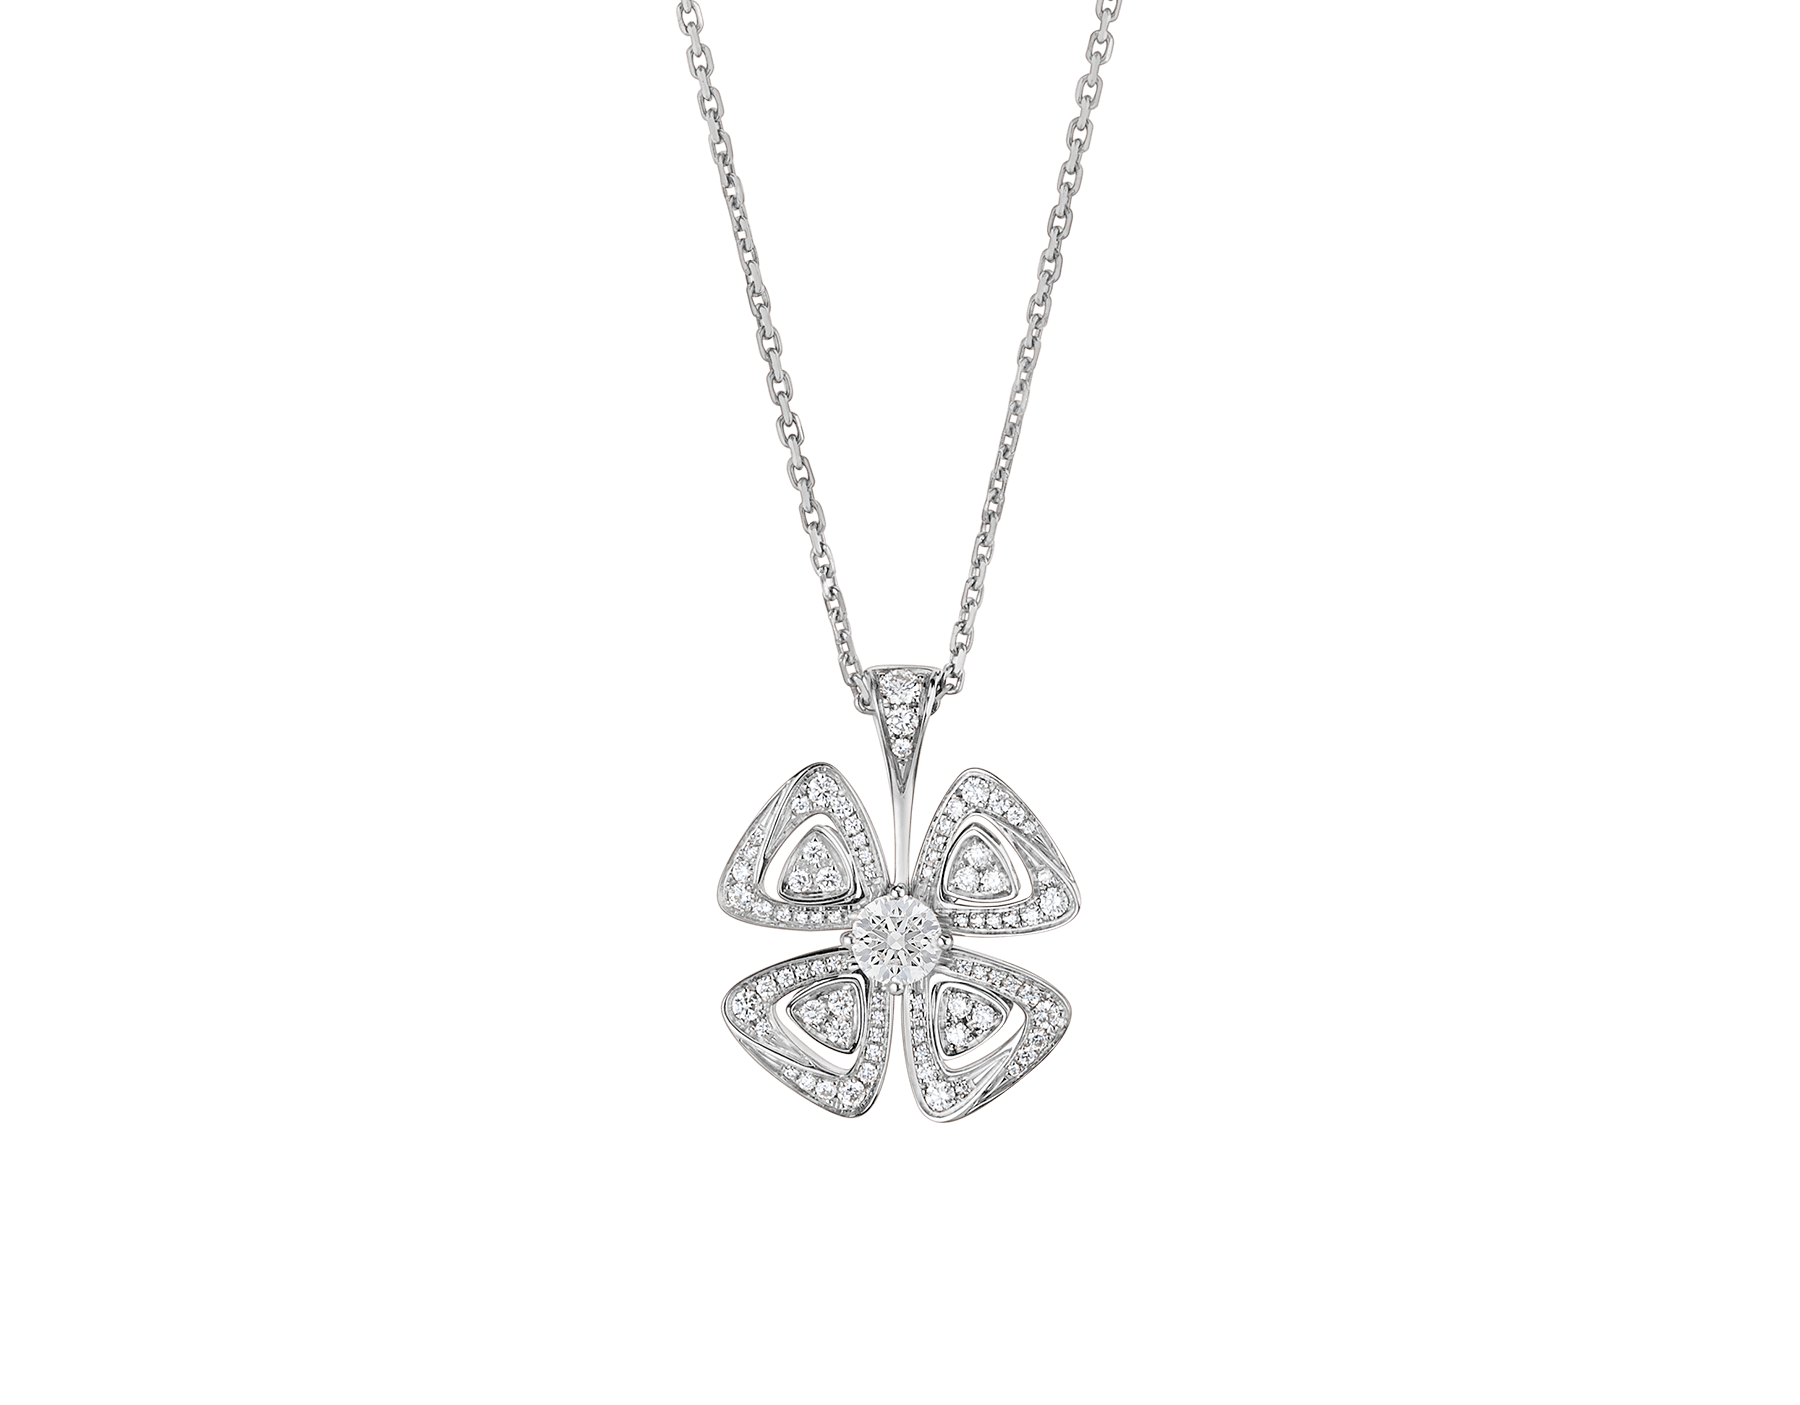 Fiorever 18 kt white gold necklace set with a central diamond and pavé diamonds. 354496 image 1